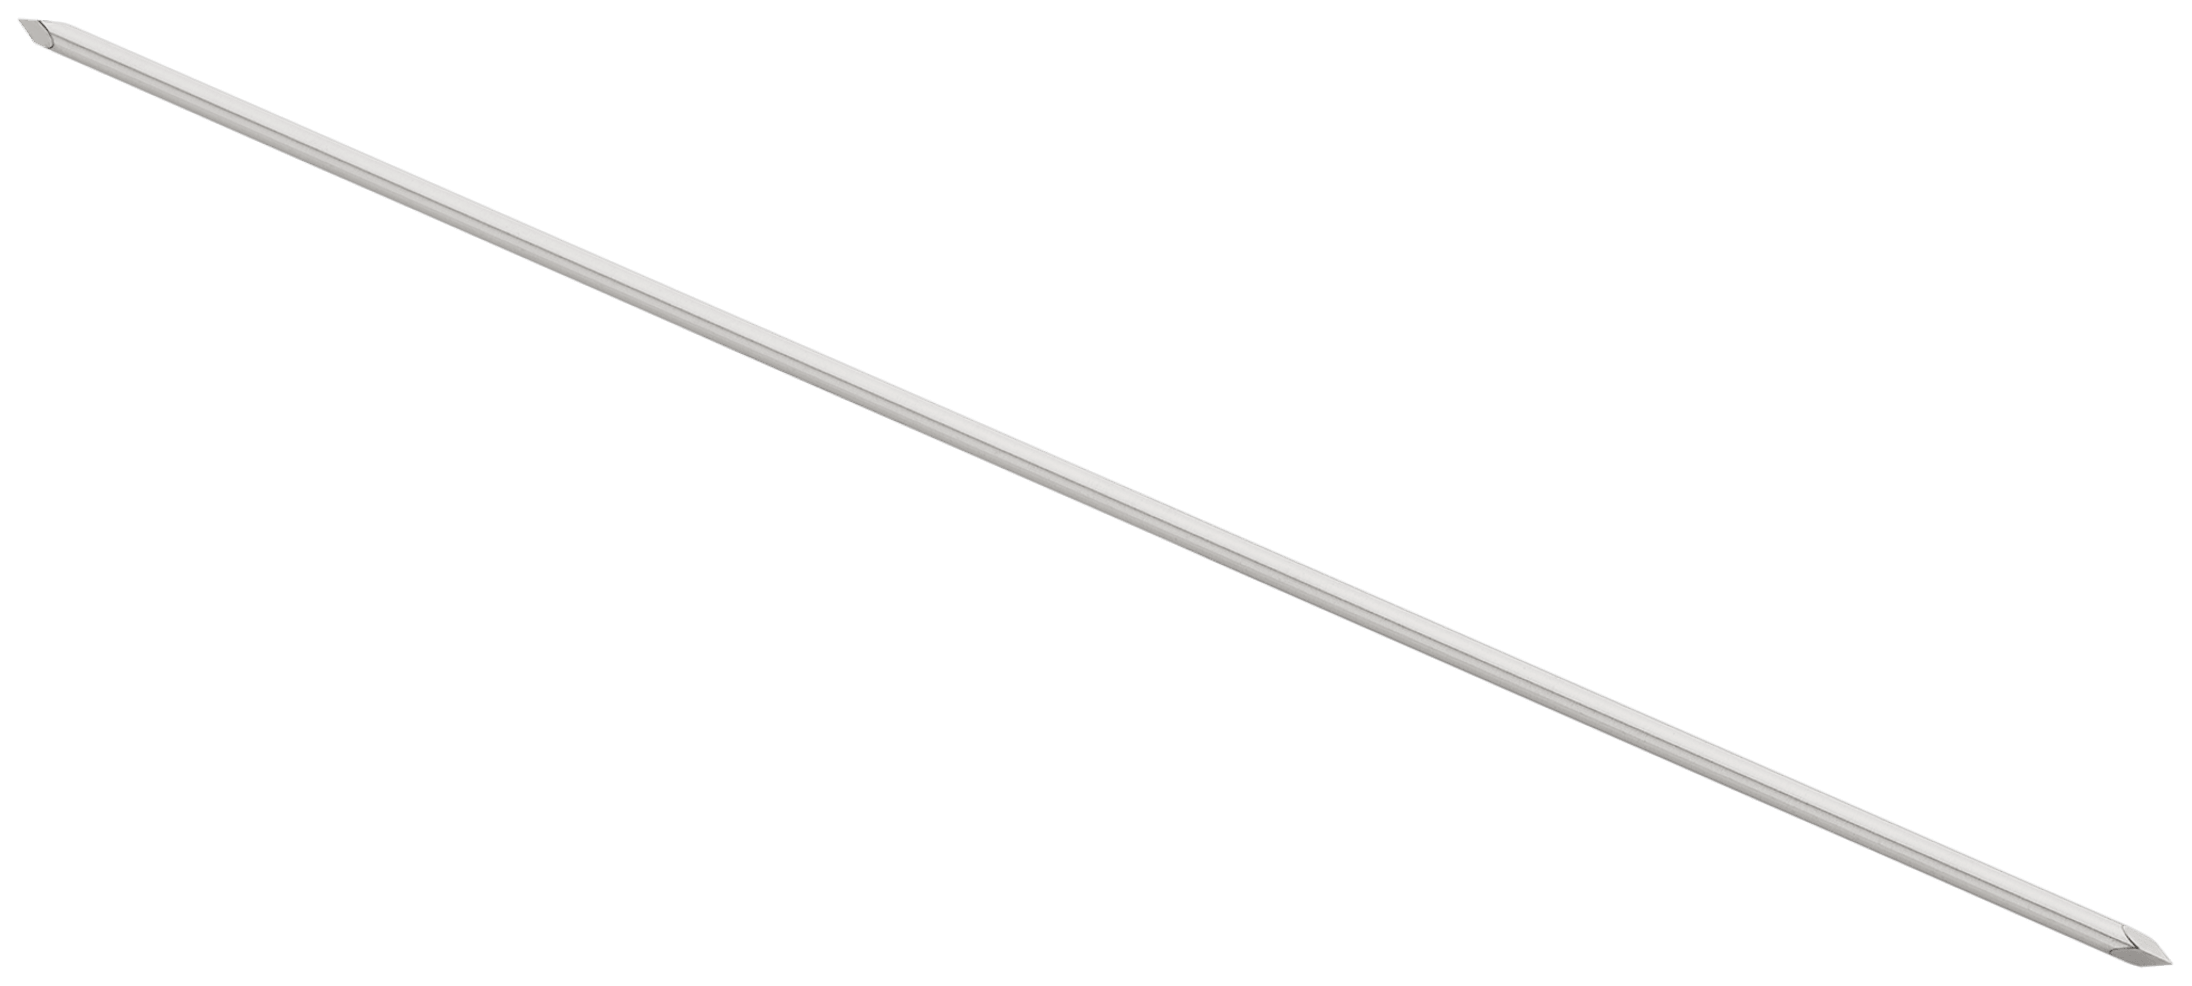 Nitinol Guidewire with Double Trocar Tip, 0.078" x 5.91" (2.0 mm x 150 mm)